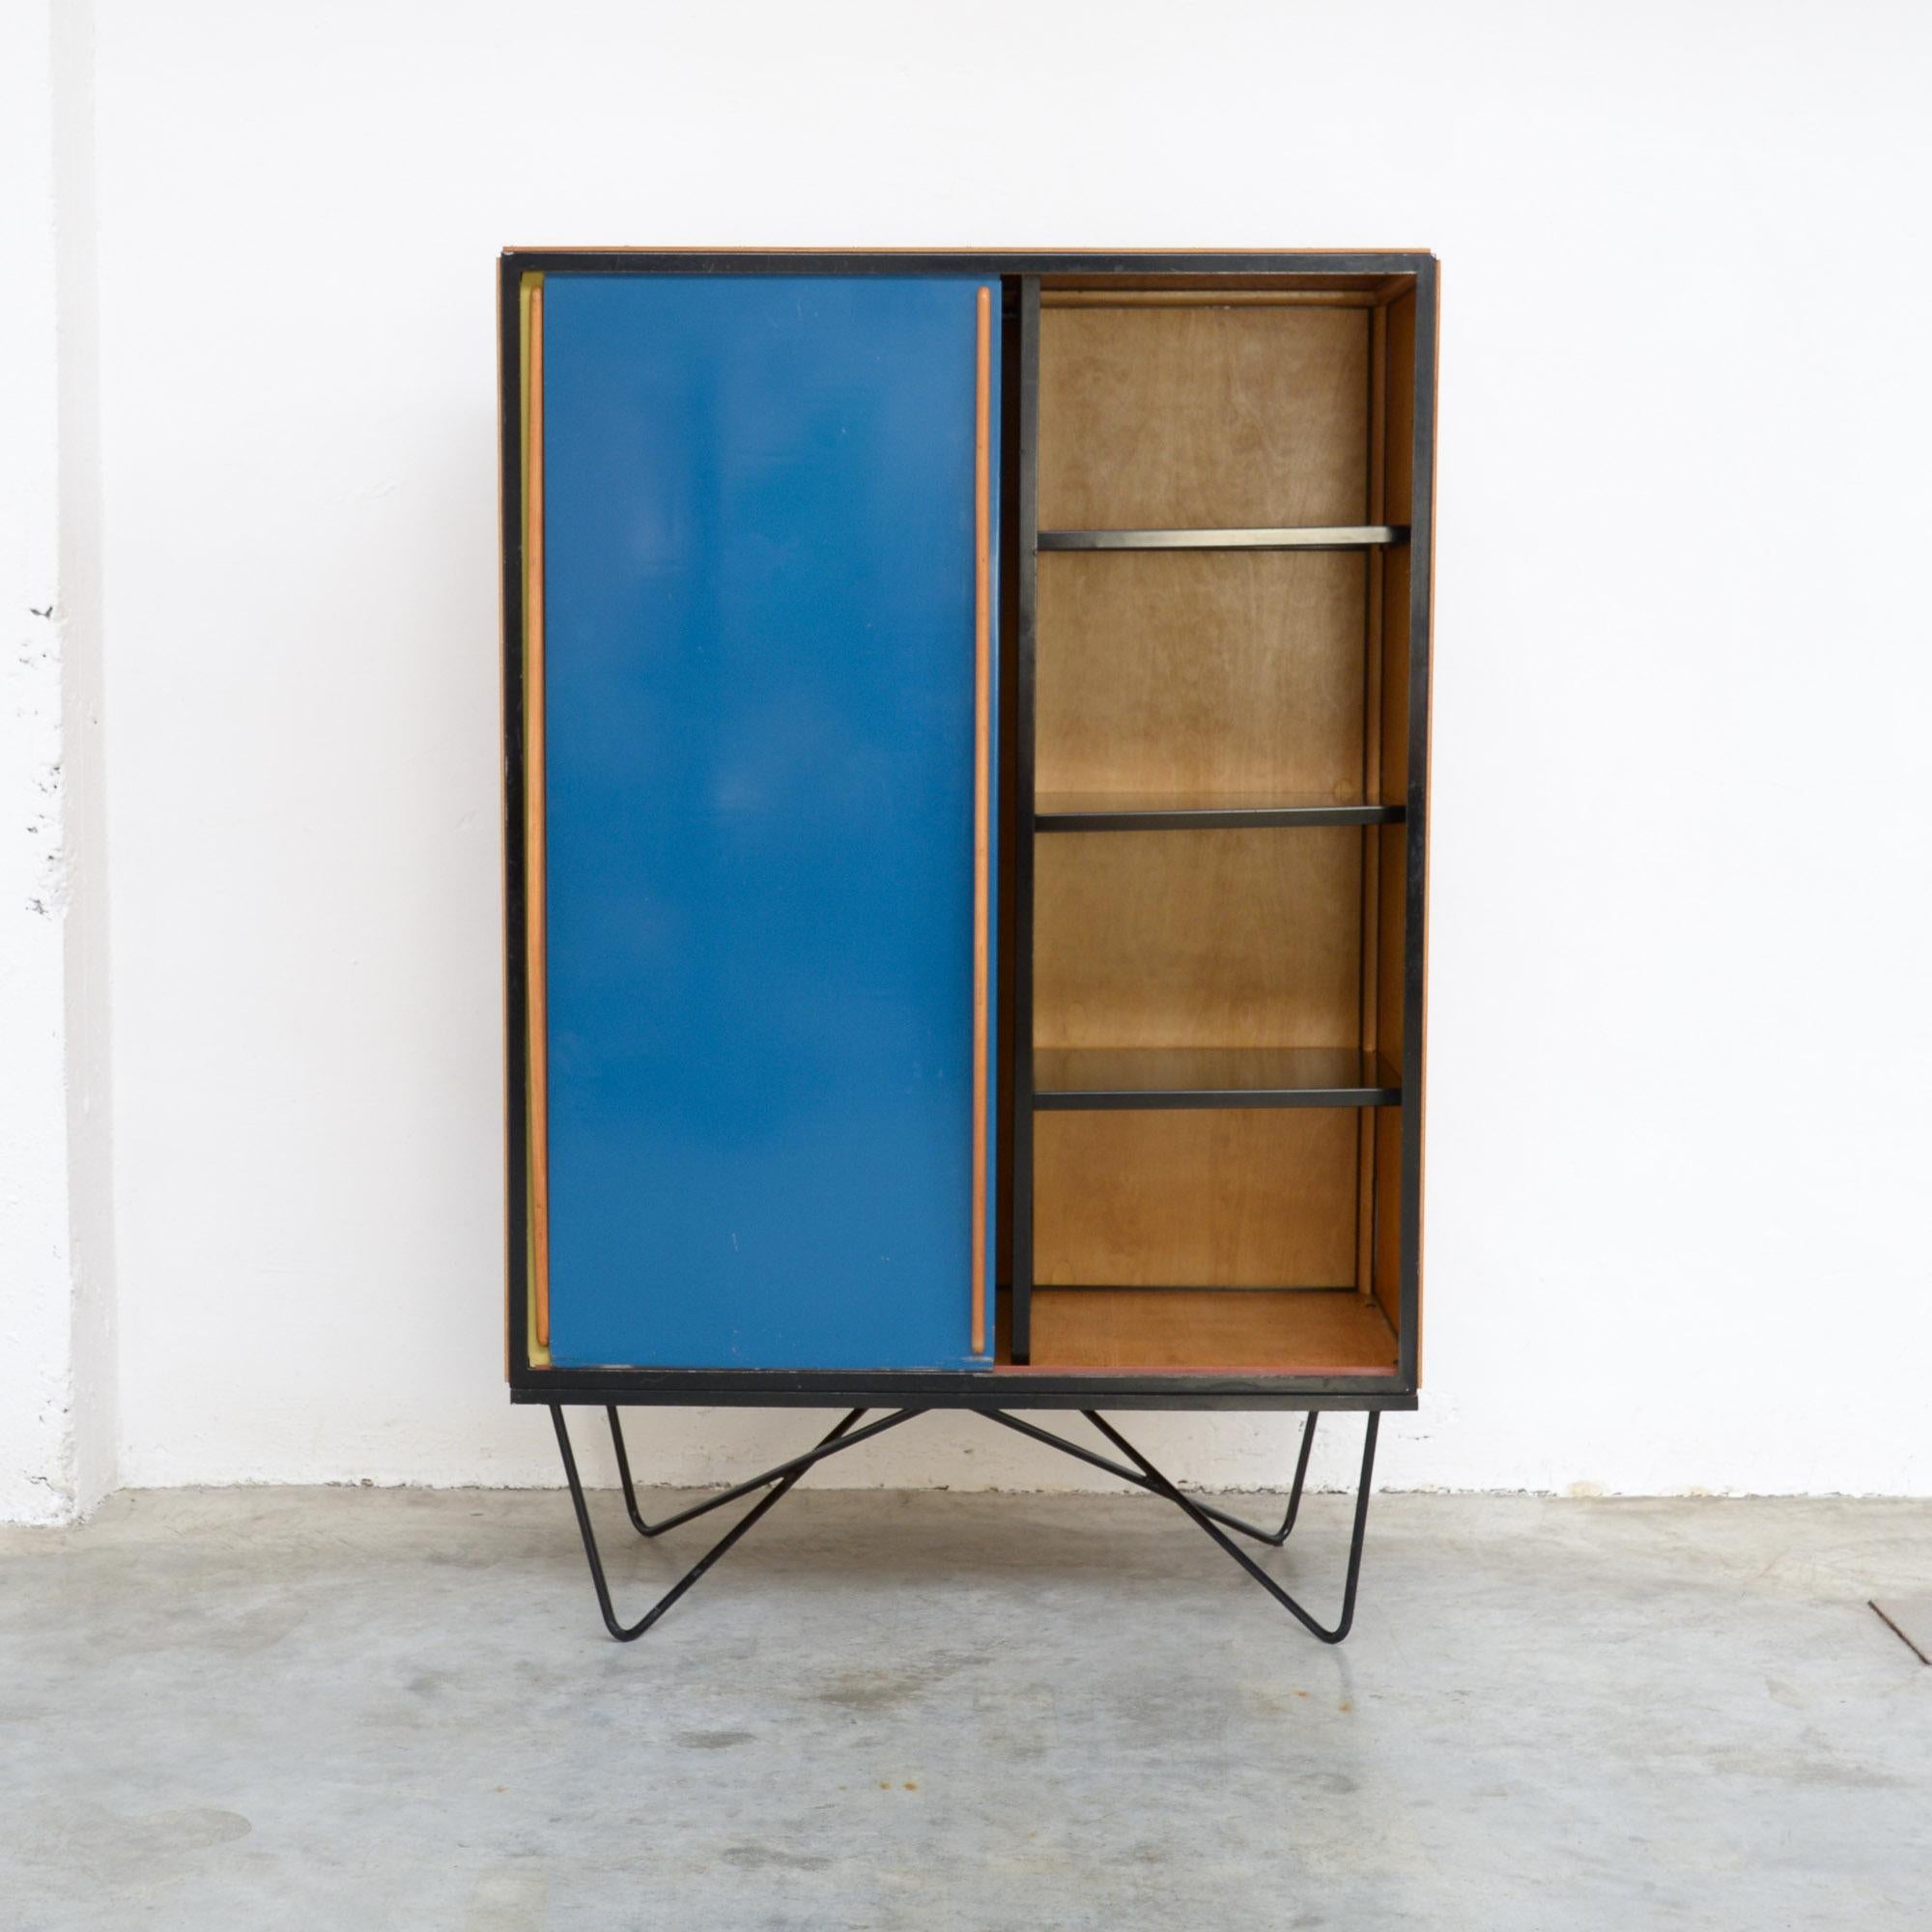 This wardrobe cabinet was designed by the Belgian architect and designer Willy Van Der Meeren for Tubax in the early 1950s.
It is a nice example of midcentury Belgian social furniture design. This wardrobe was designed for the private